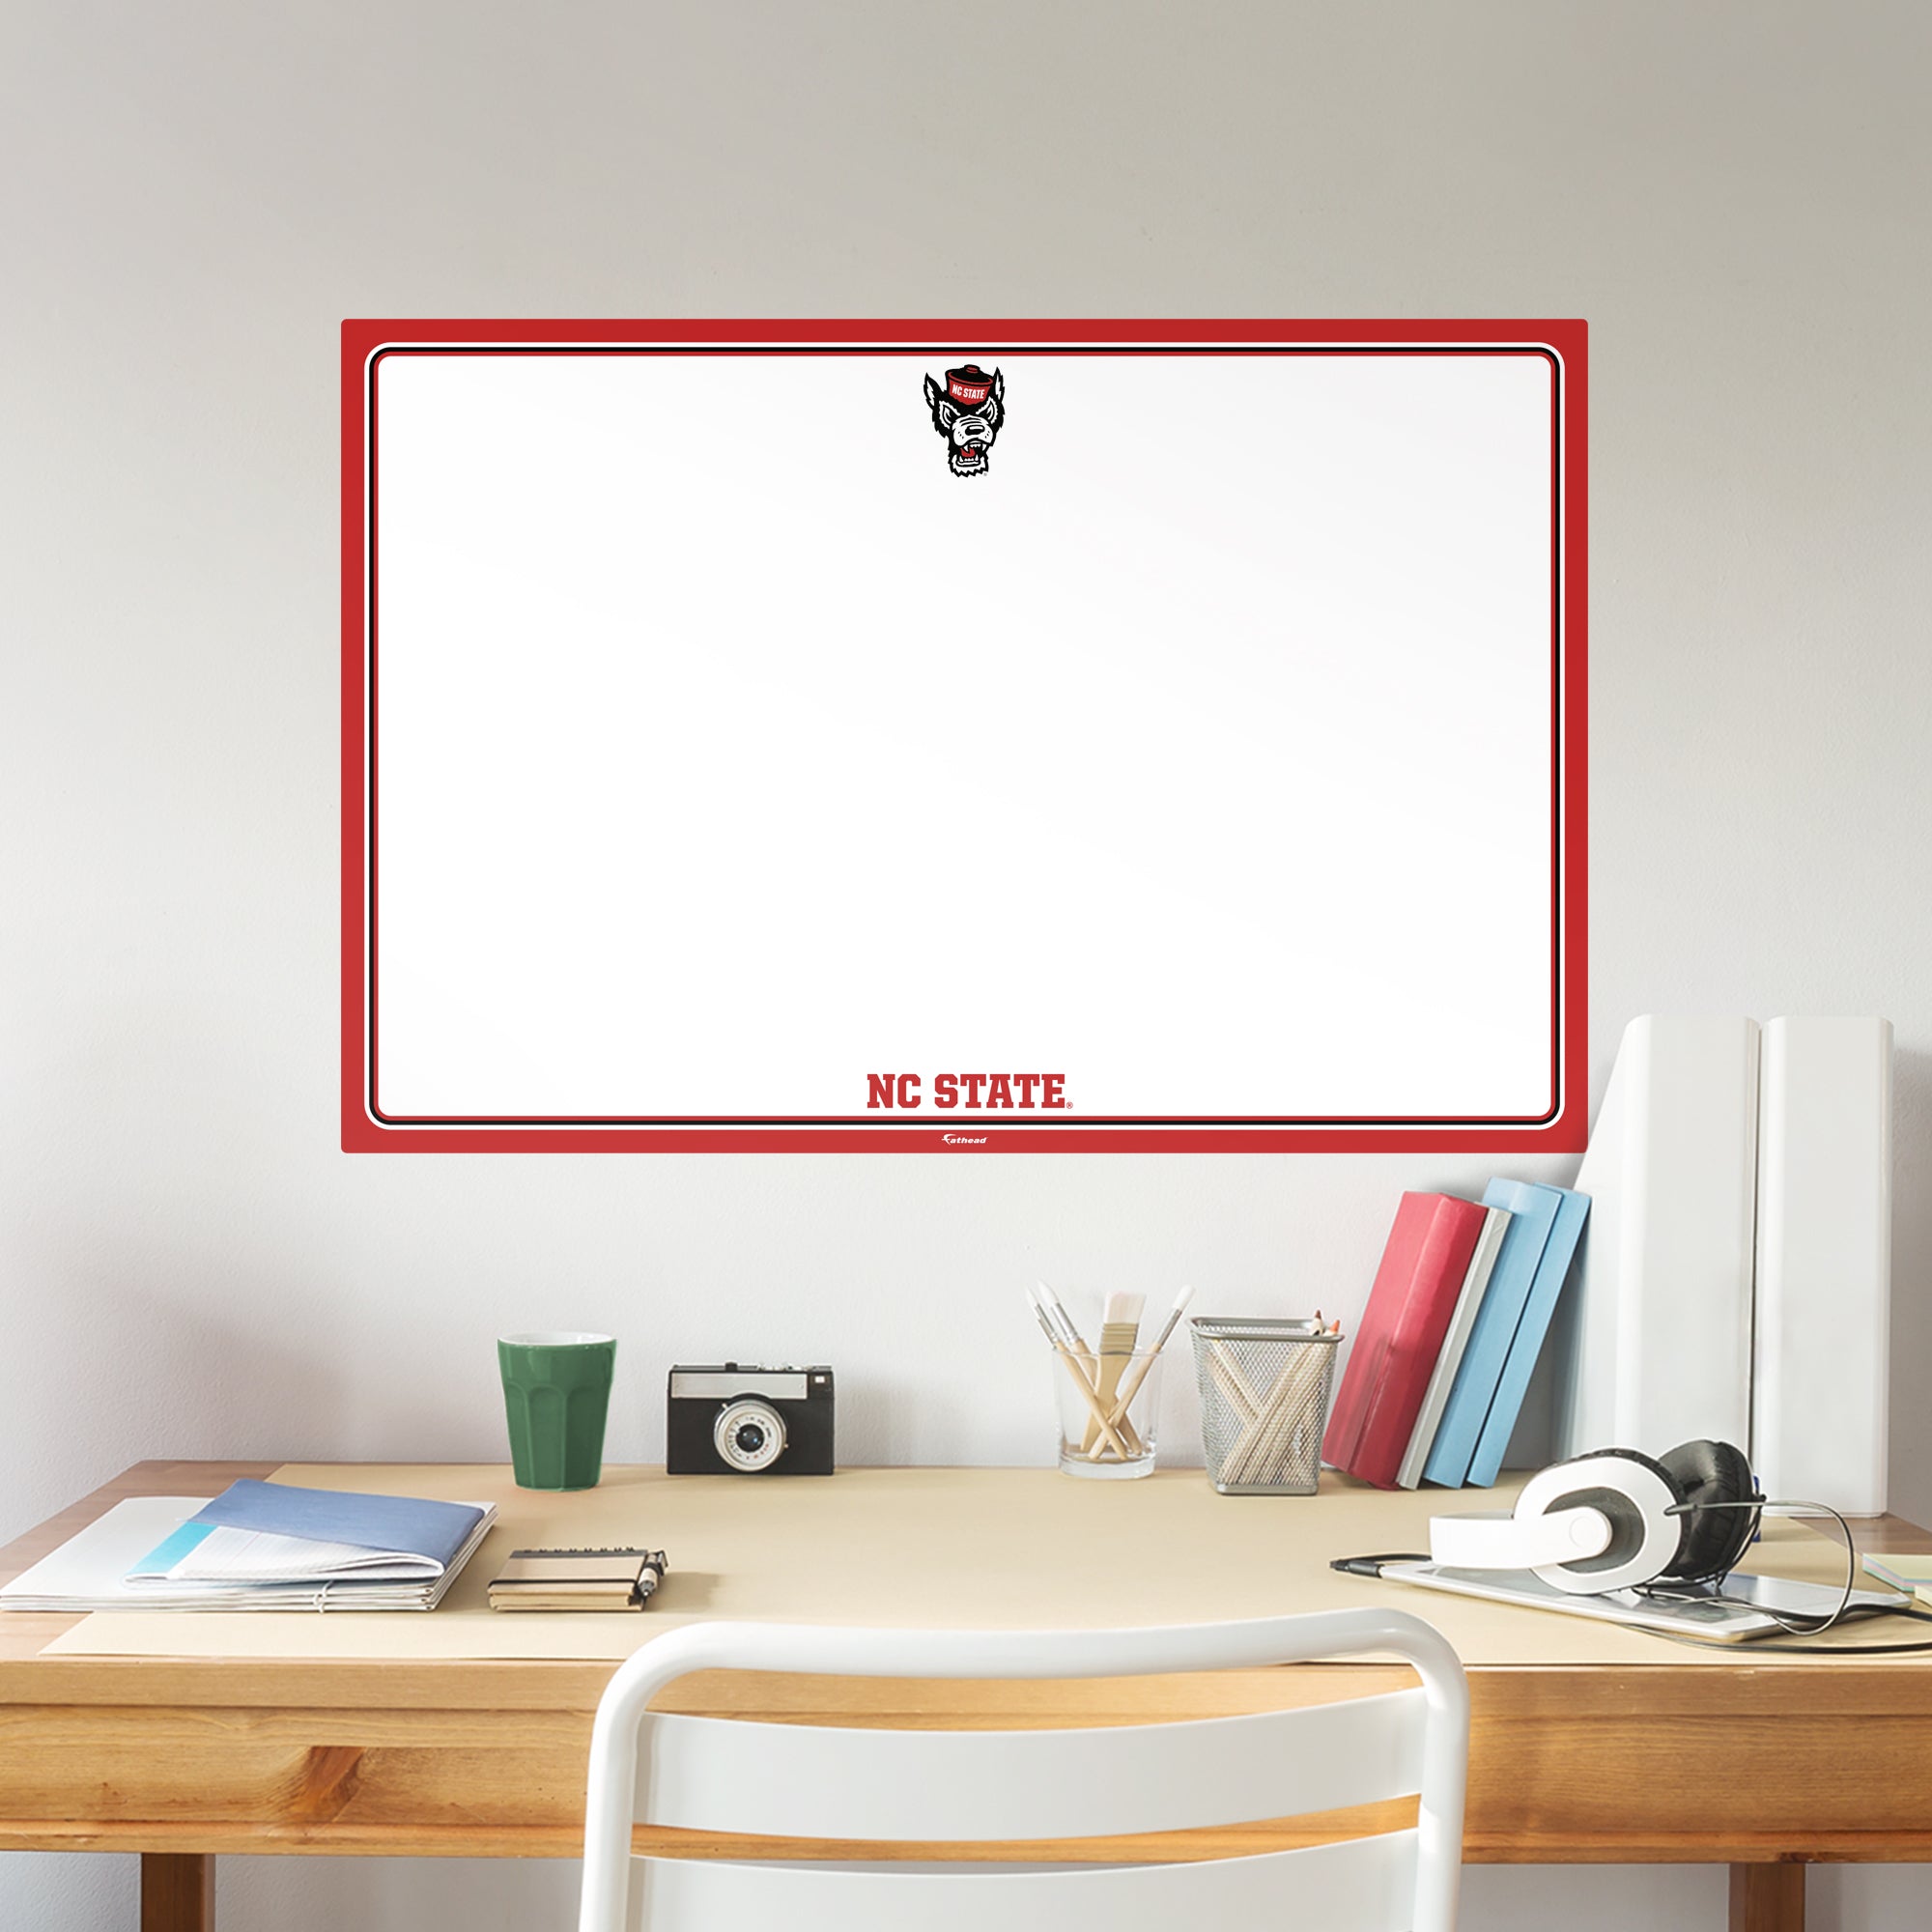 North Carolina State Wolfpack: Dry Erase Whiteboard - X-Large Officially Licensed NCAA Removable Wall Decal XL by Fathead | Viny